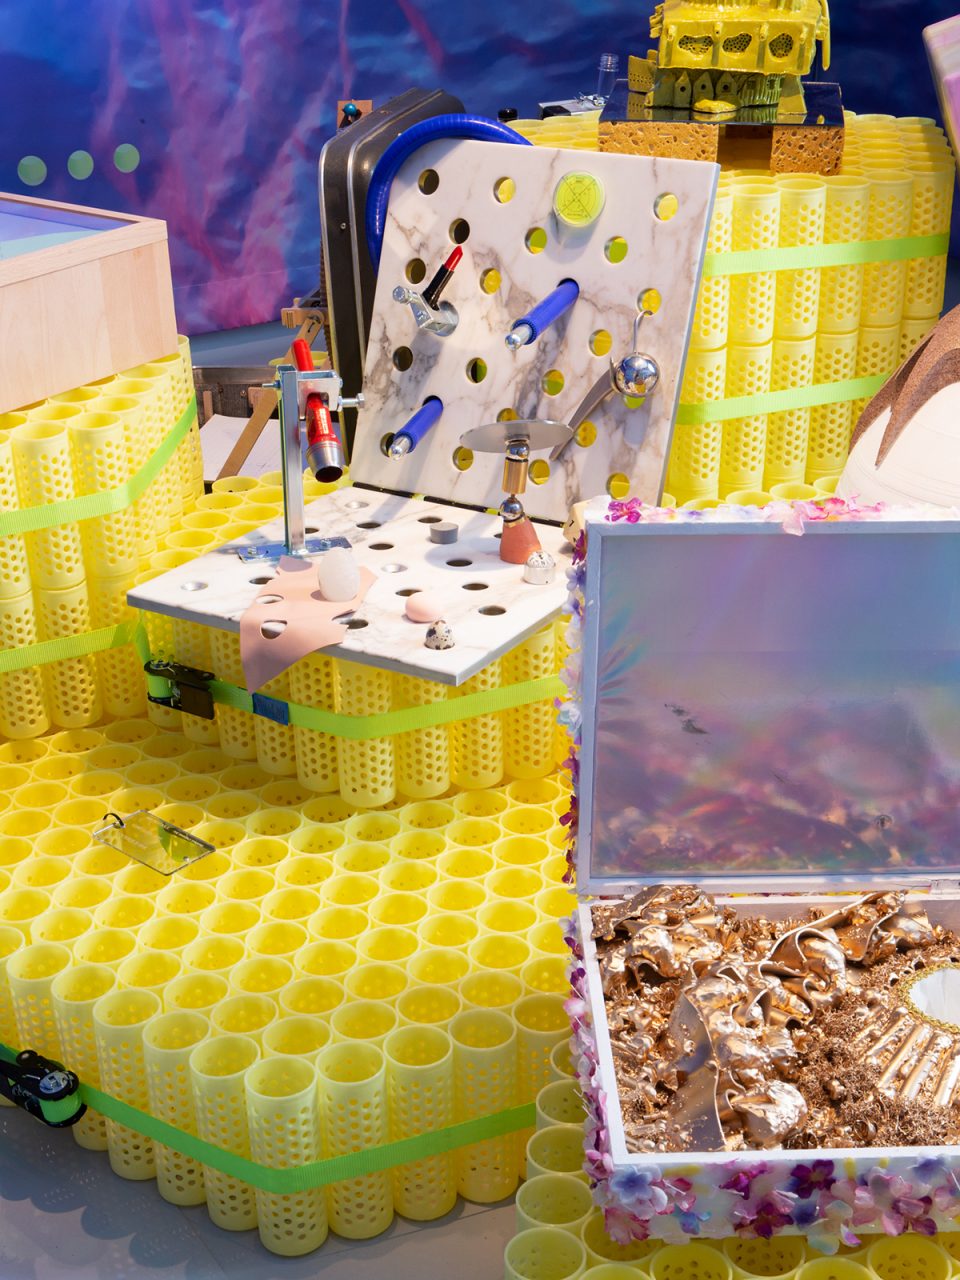 Photo of yellow plastic pedestals supporting displays with many little objects